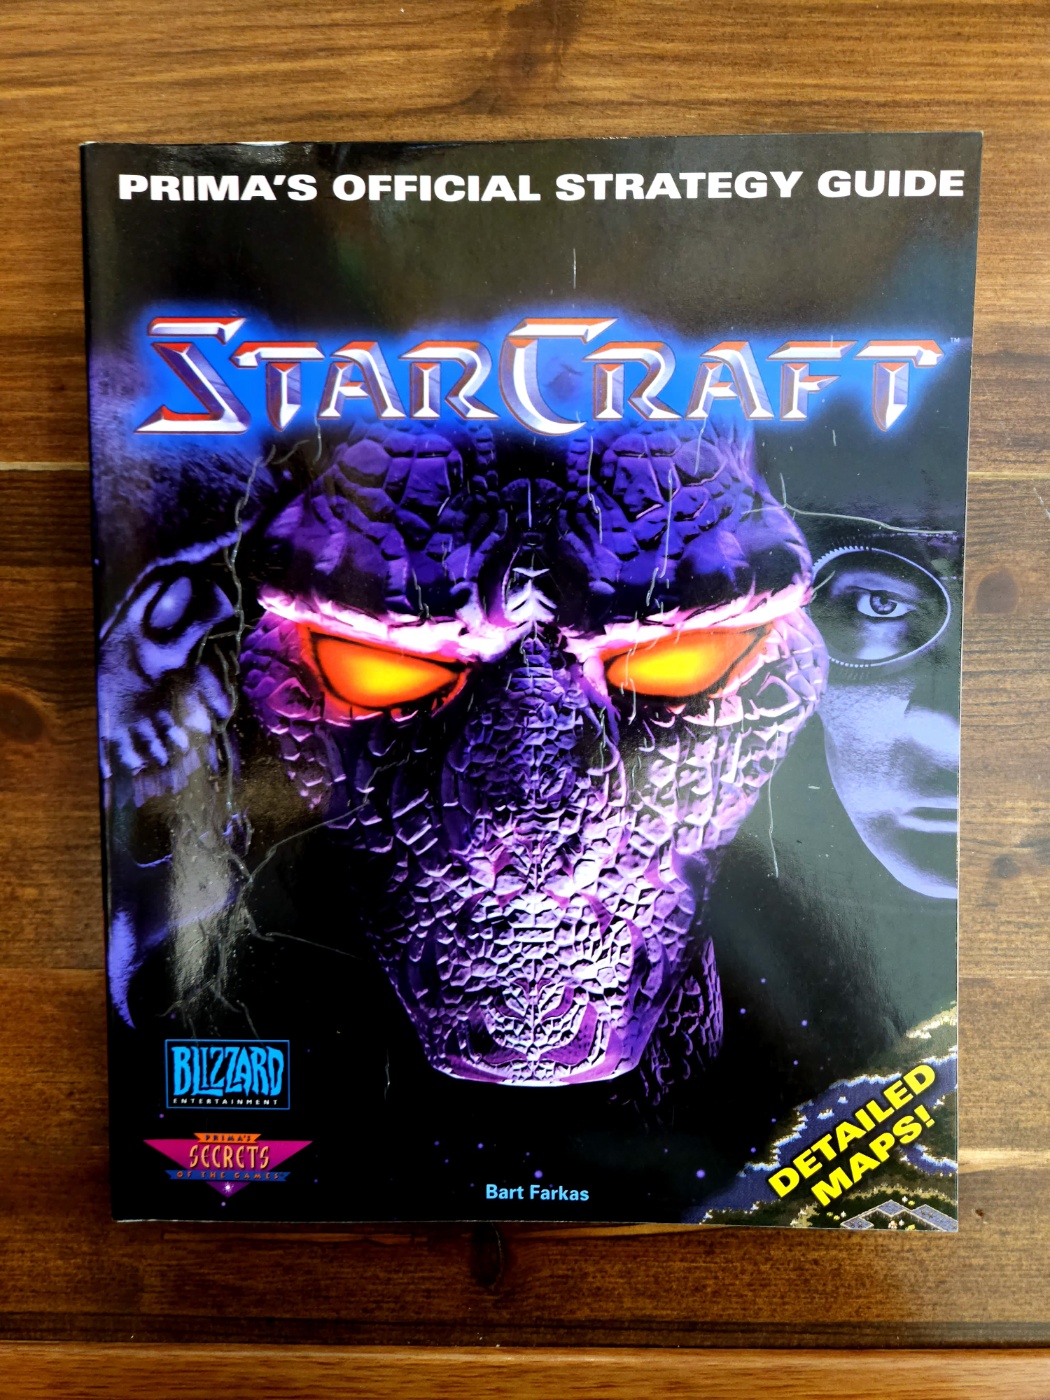 STAR CRAFT (스타크래프트 공략집) - Prima's official strategy guide 